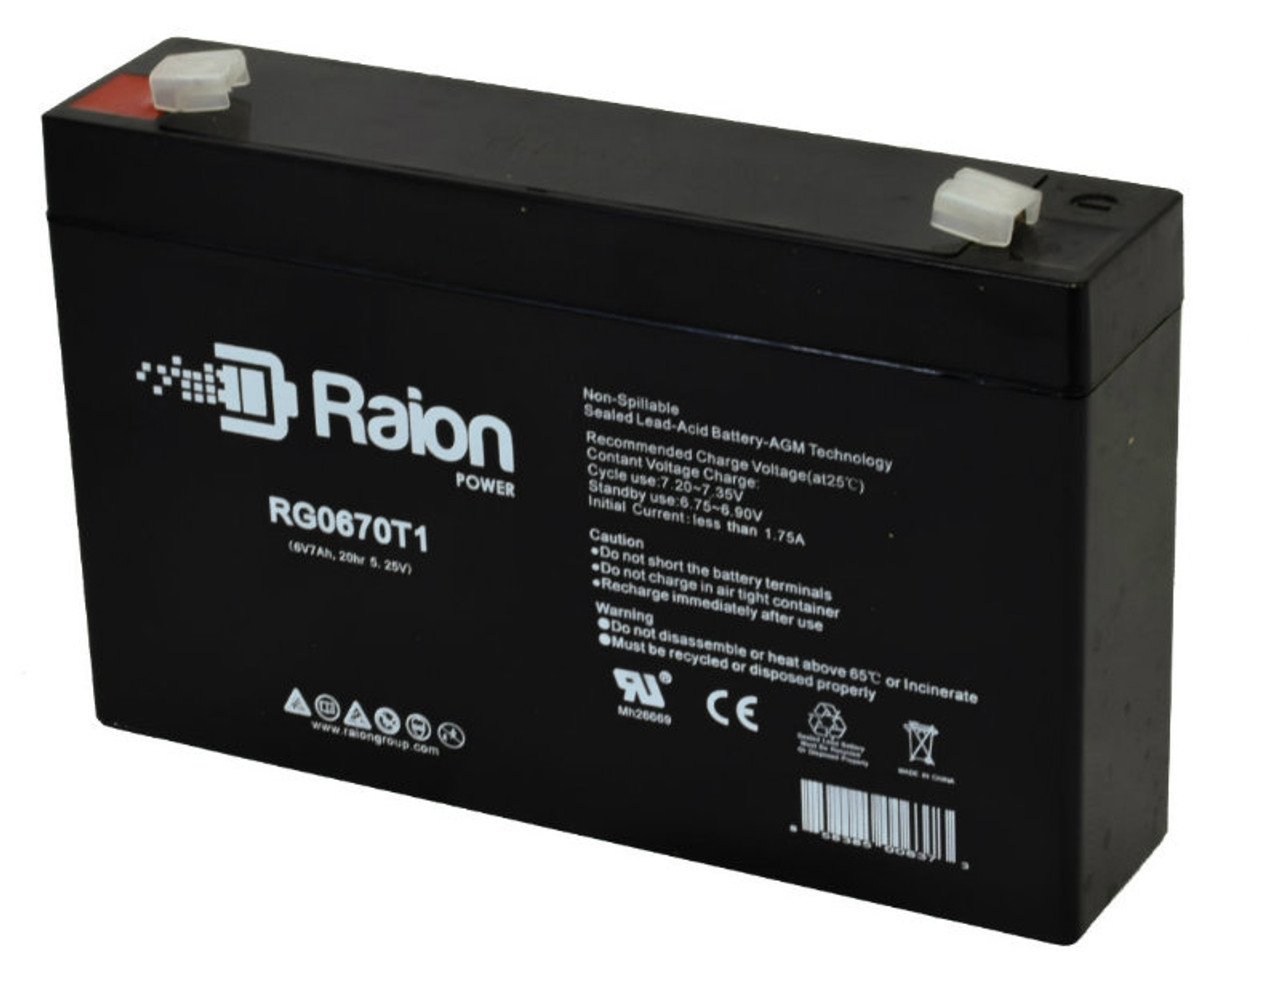 Raion Power RG0670T1 Replacement Battery for Alexander GB665 OEM Battery